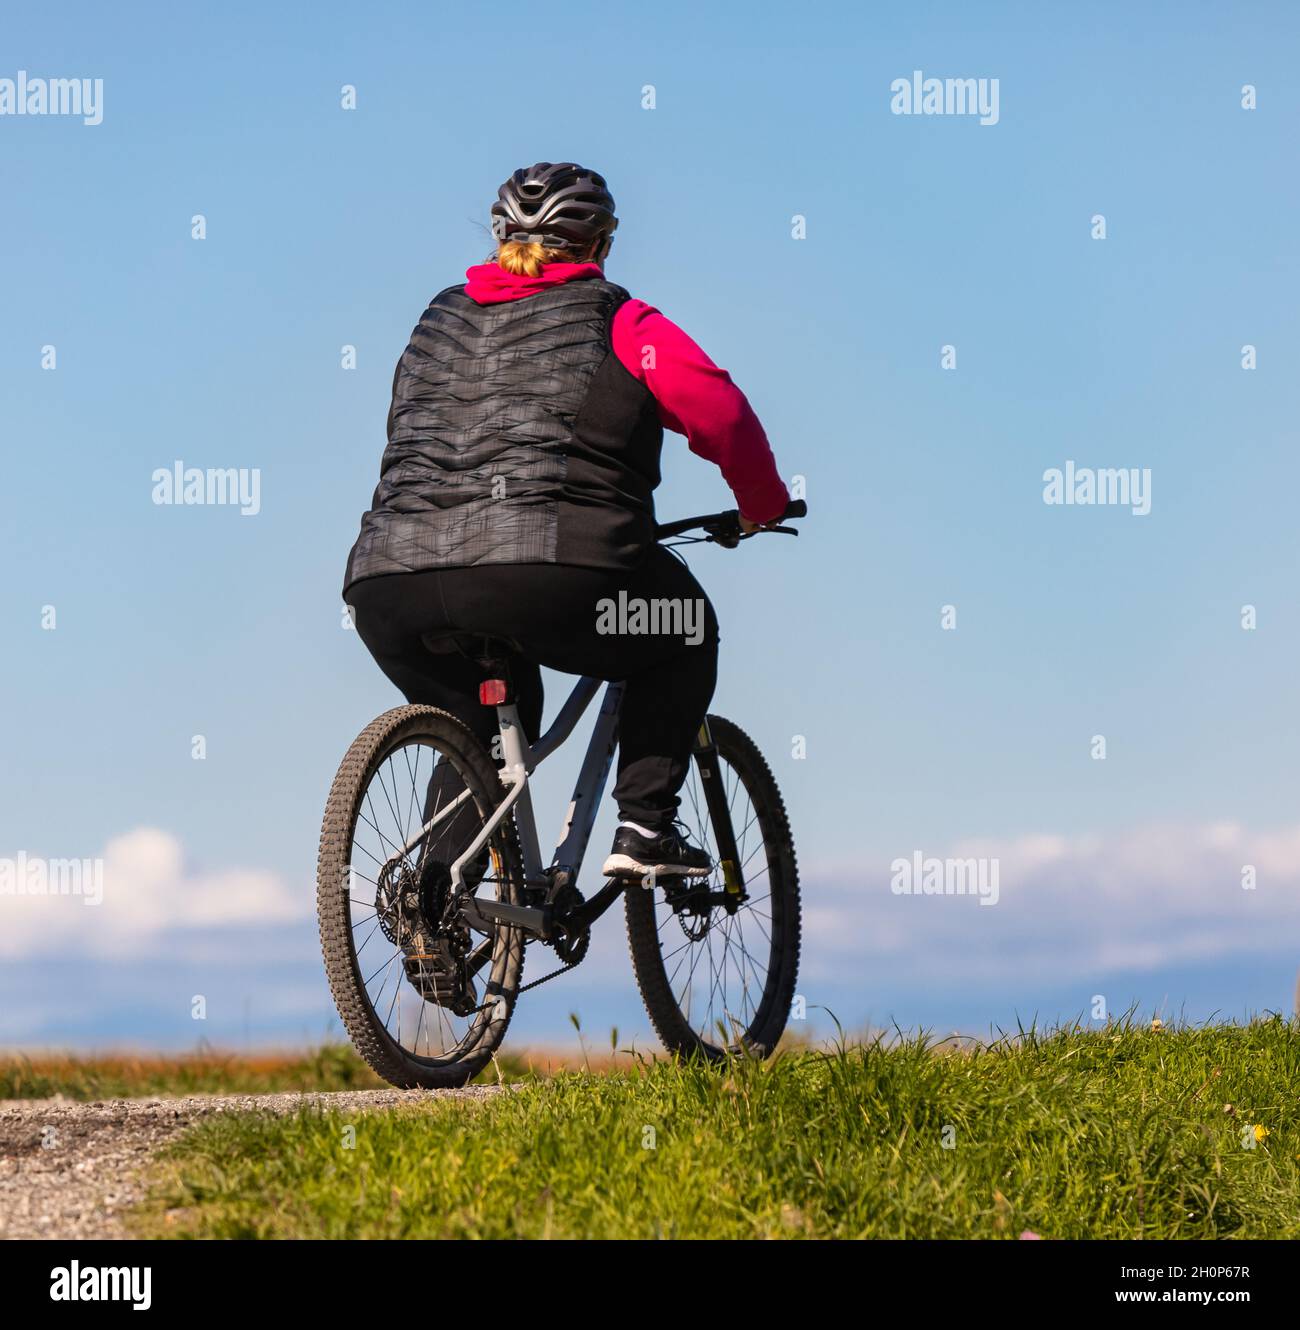 Overweight woman slimming on bicycle outdoor in the park. Healthy lifestyle concept. Street photo, selective focus, travel photo. Stock Photo